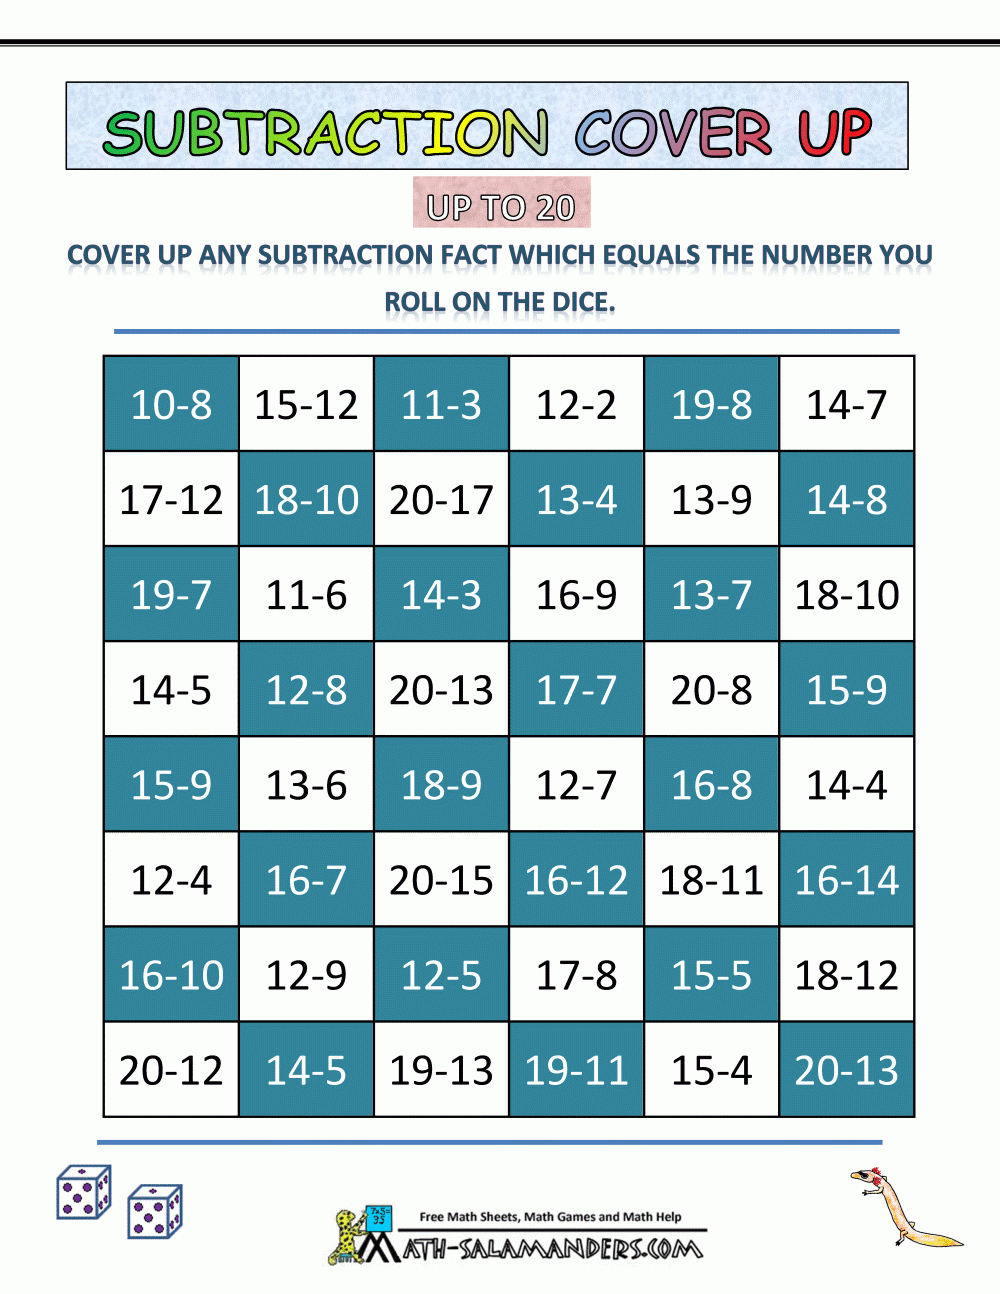 Subtraction Games For Kids - Free Printable Maths Games